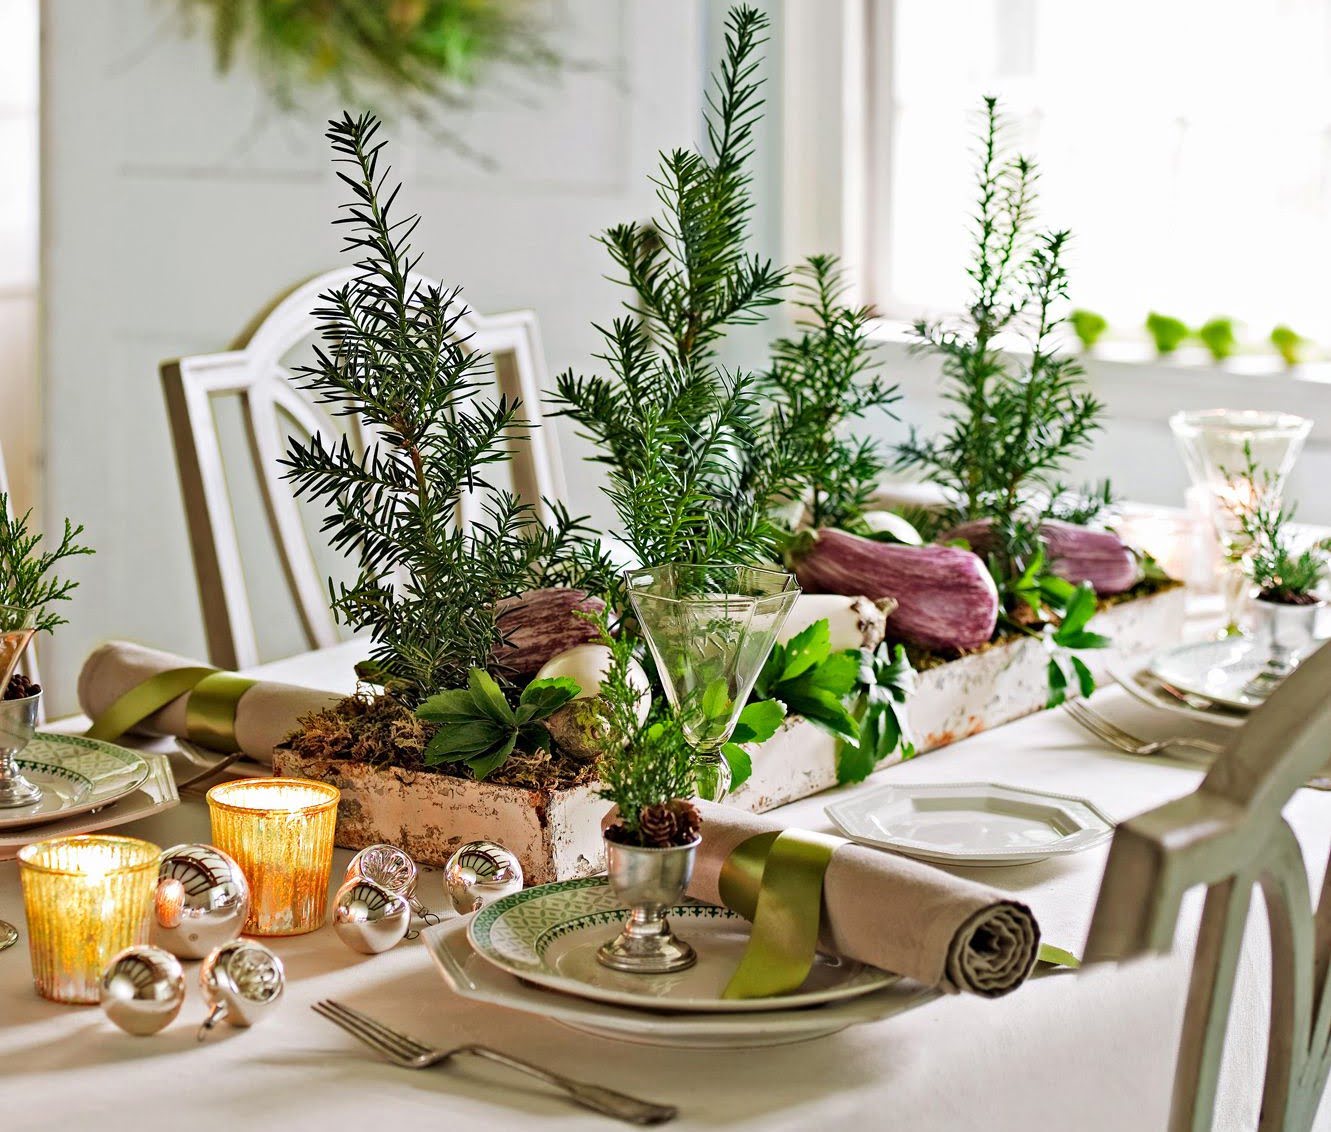 How To Make A Box Of Greens Table Centerpiece For Christmas | Storables